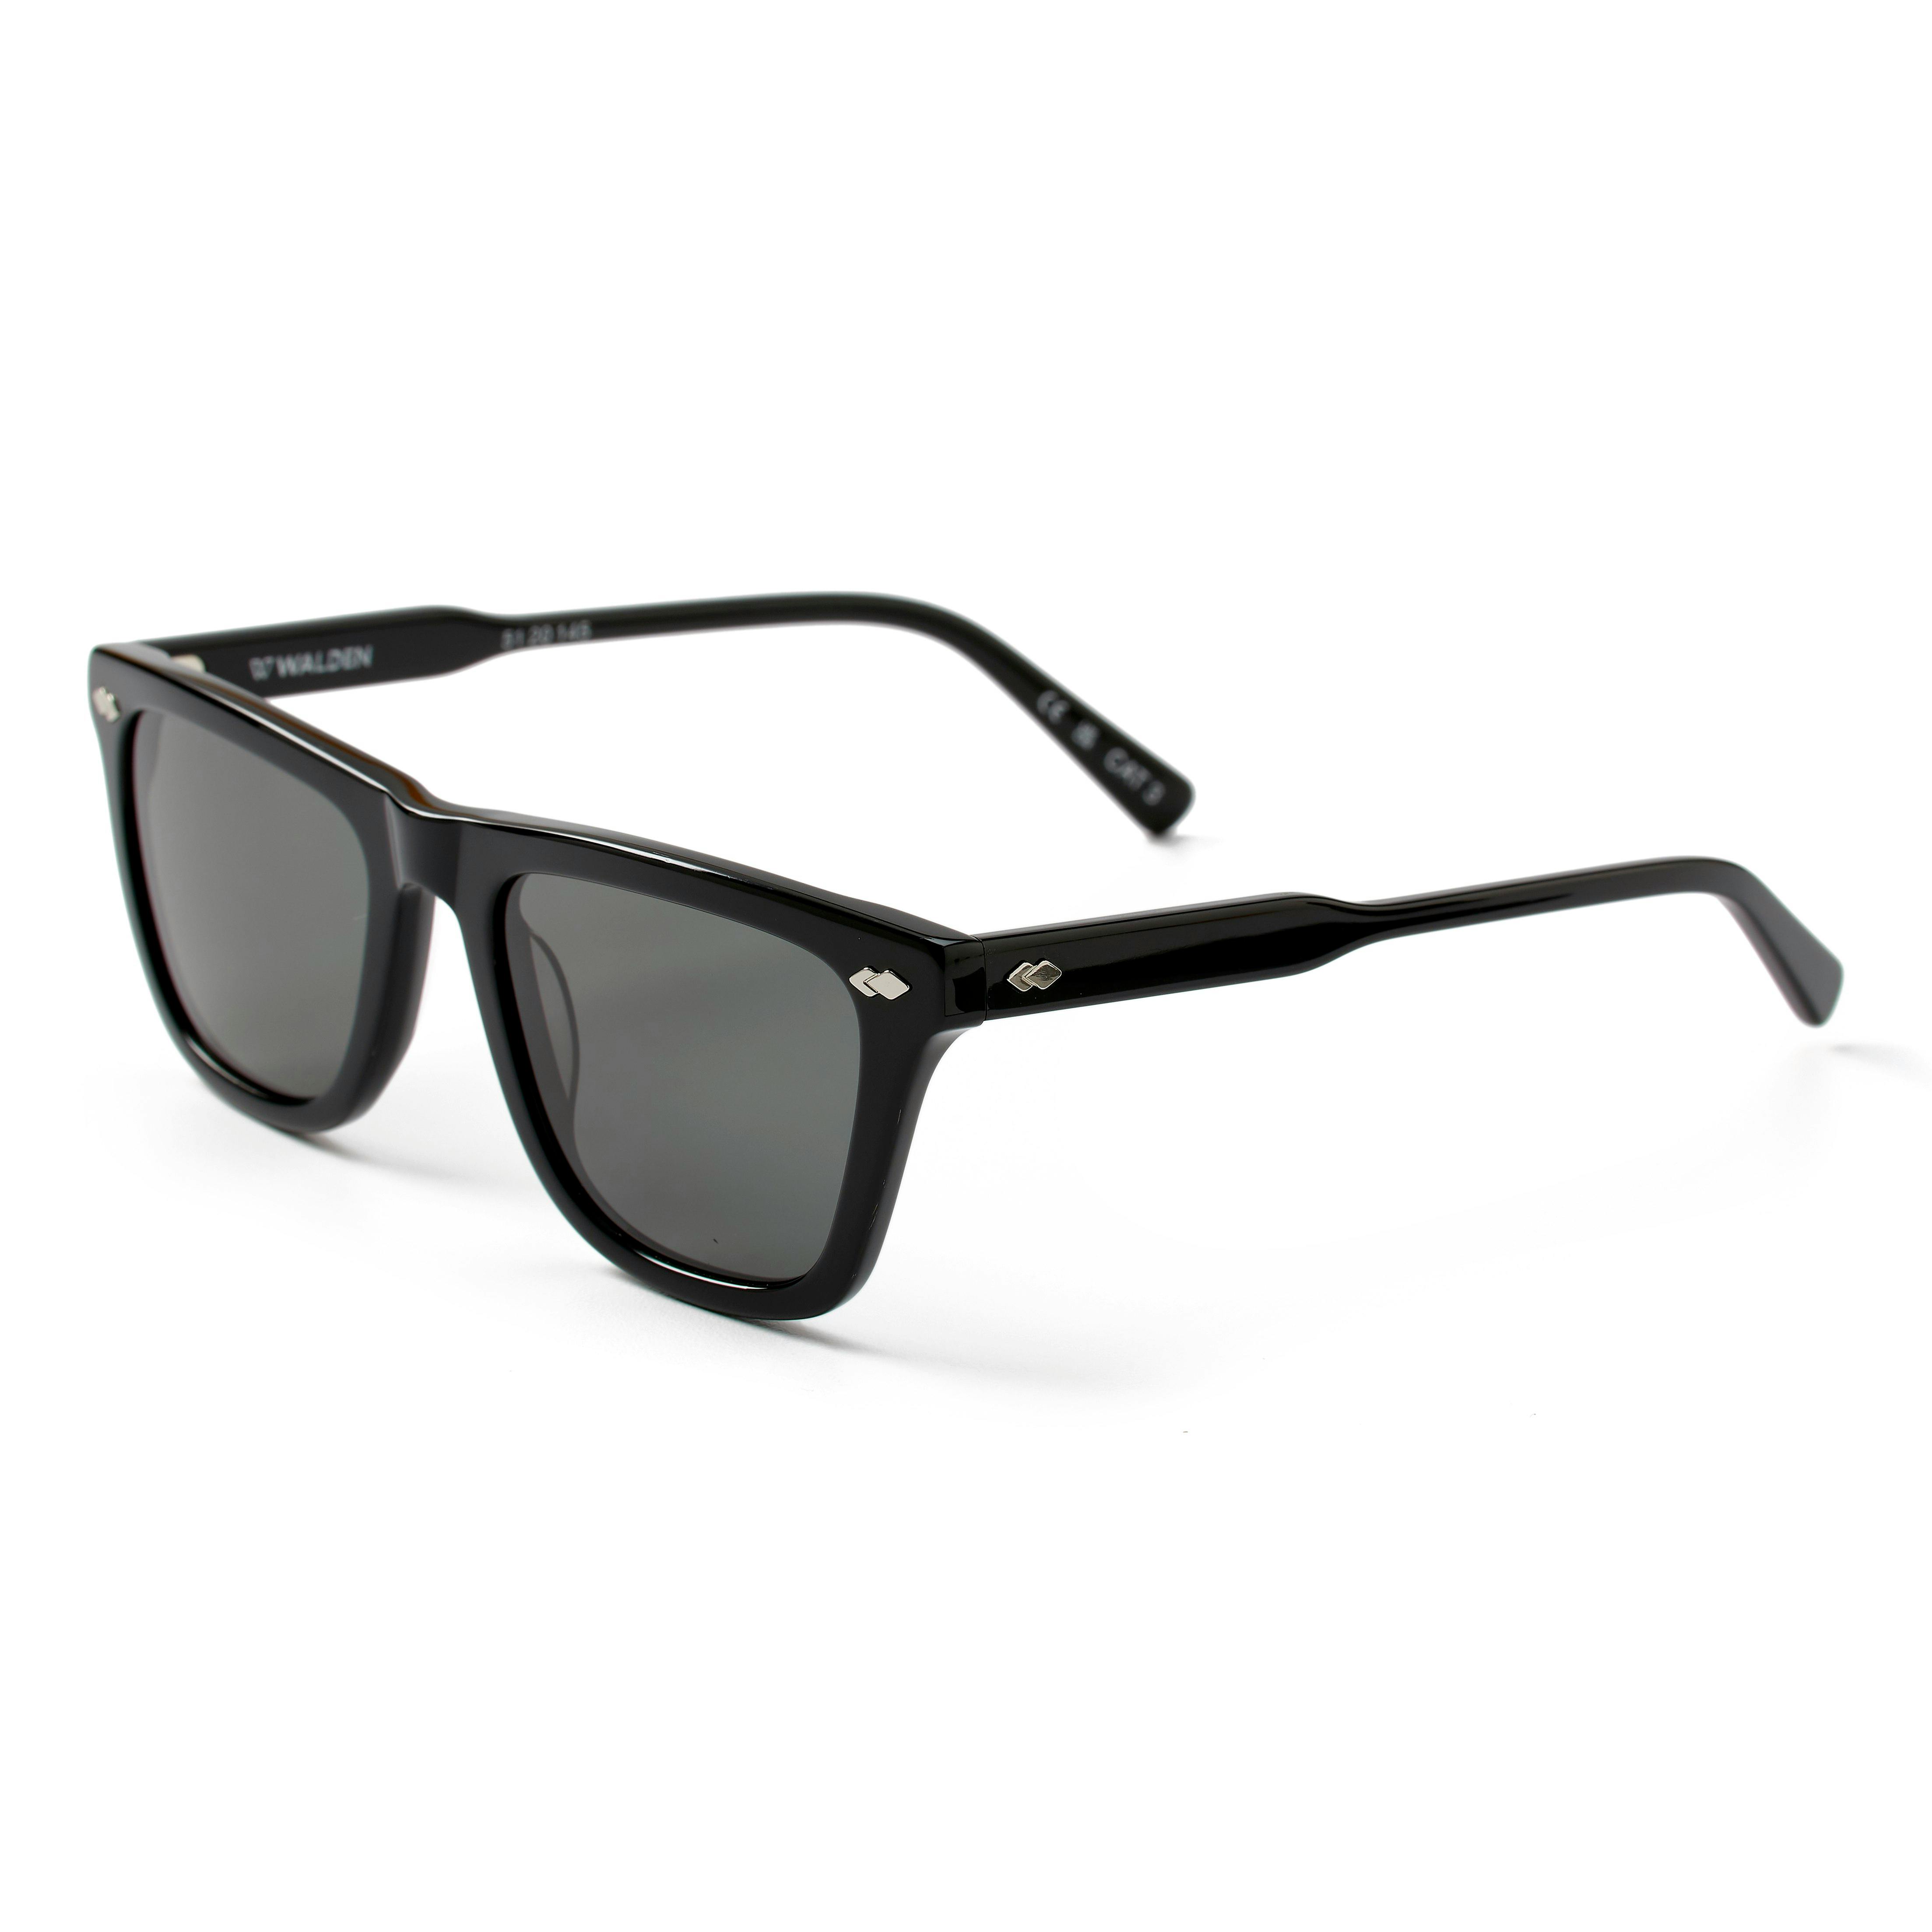 Sun Ray Recycled Plastic Sunglasses Solid Black One Size Mixed Sunglasses